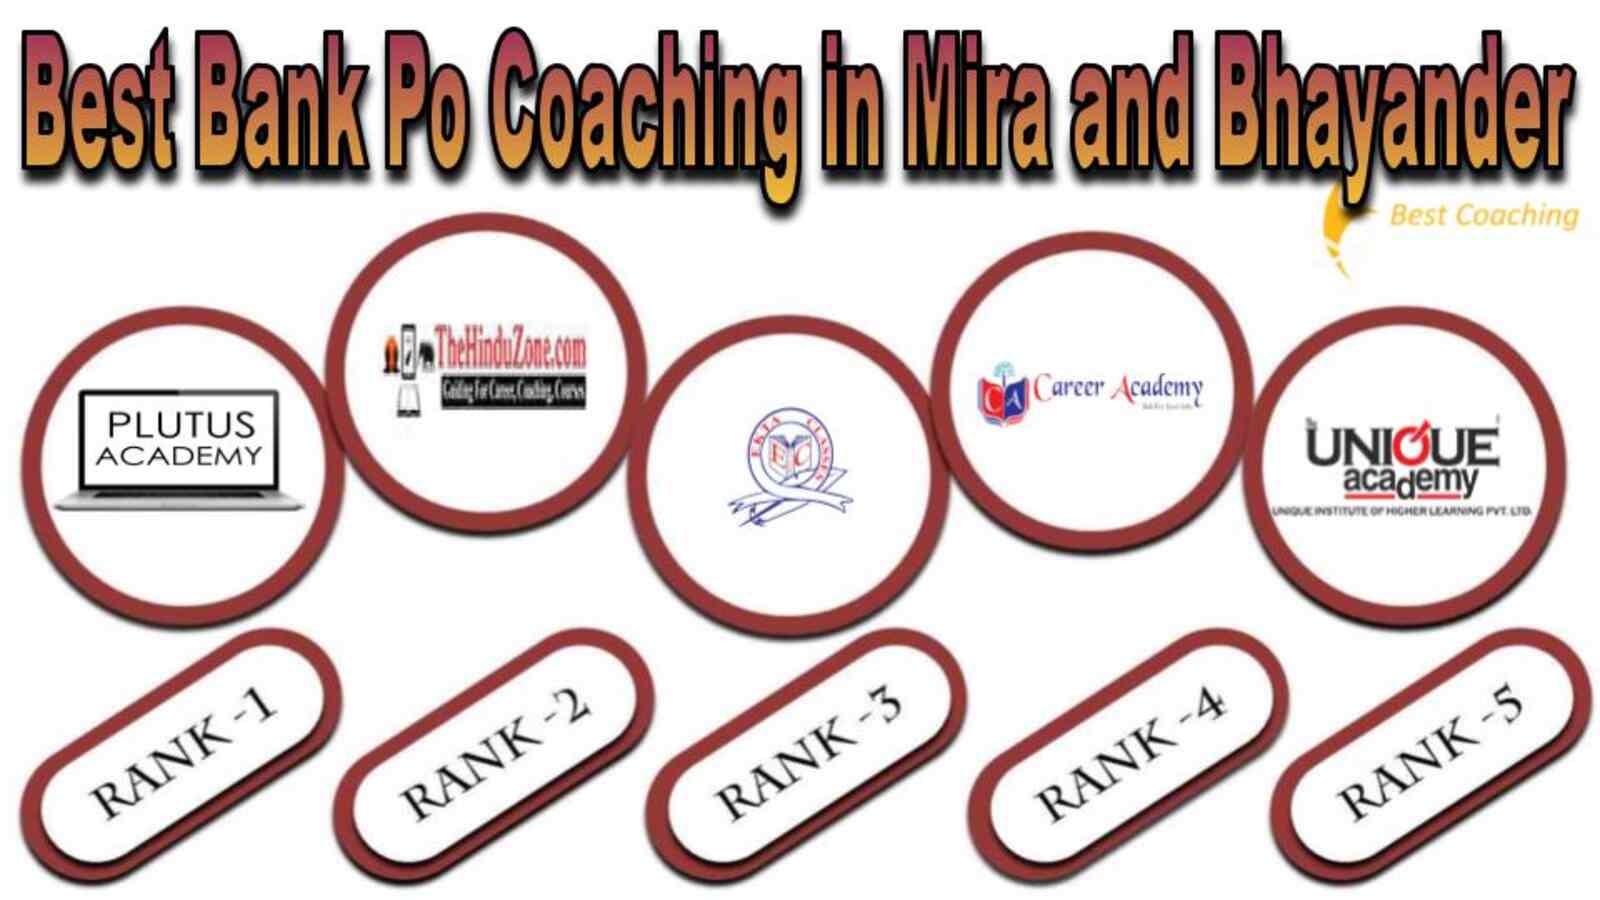 Best bank po coaching in Mira and Bhayander